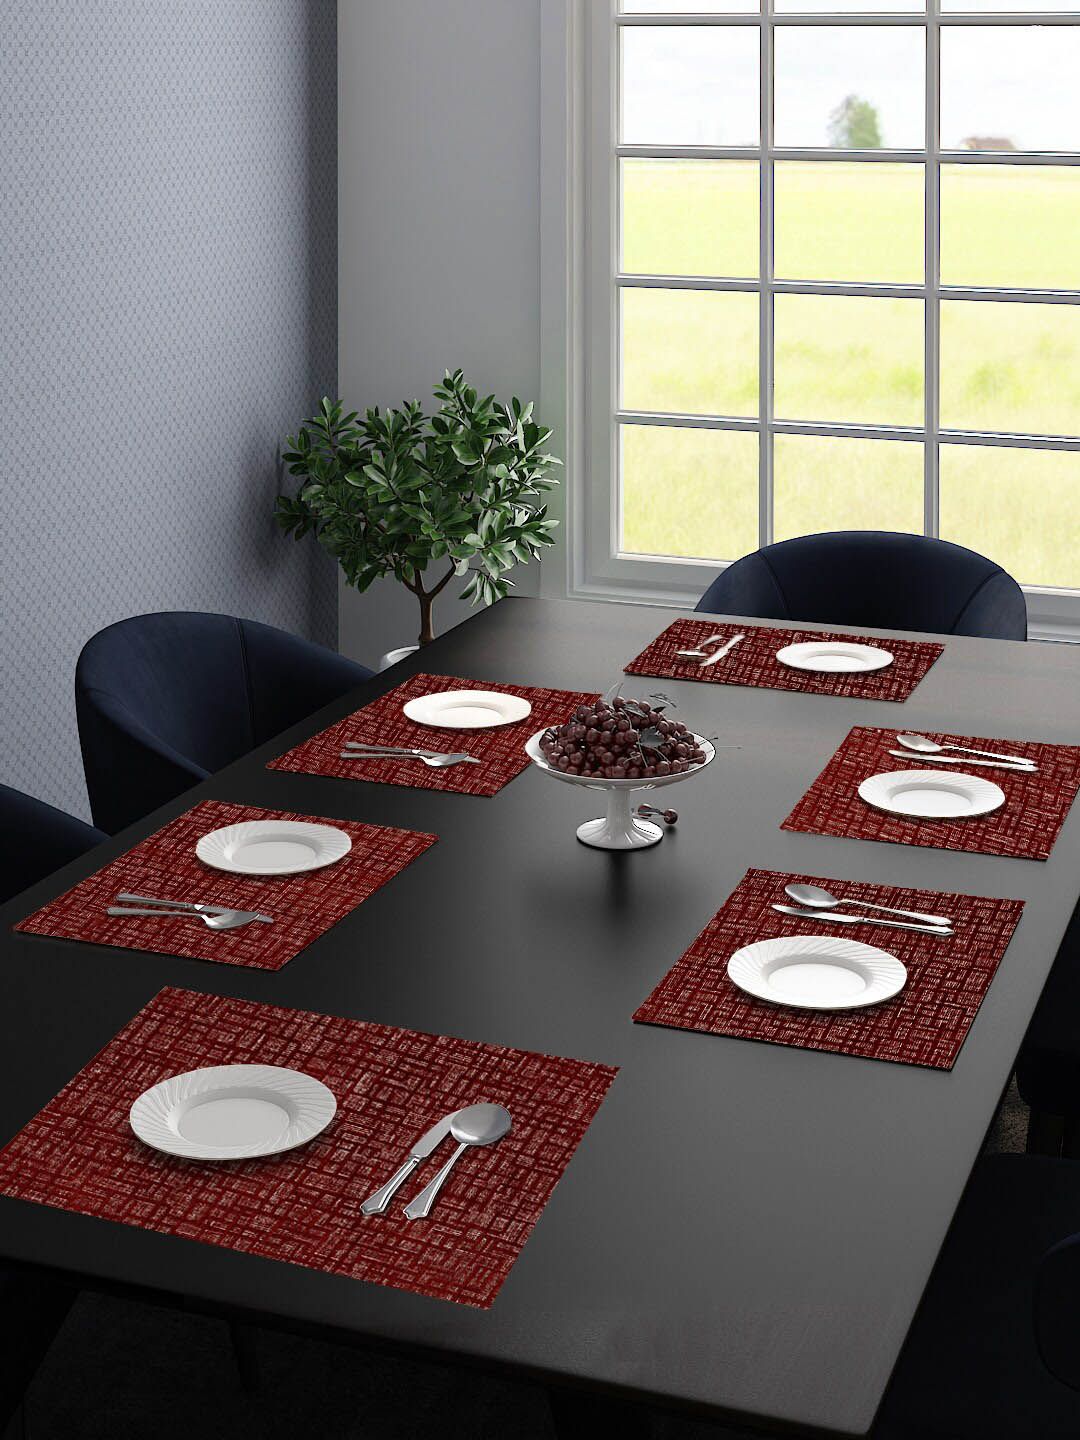 Saral Home Set of 6 Maroon Printed Dining Table Placemats Price in India